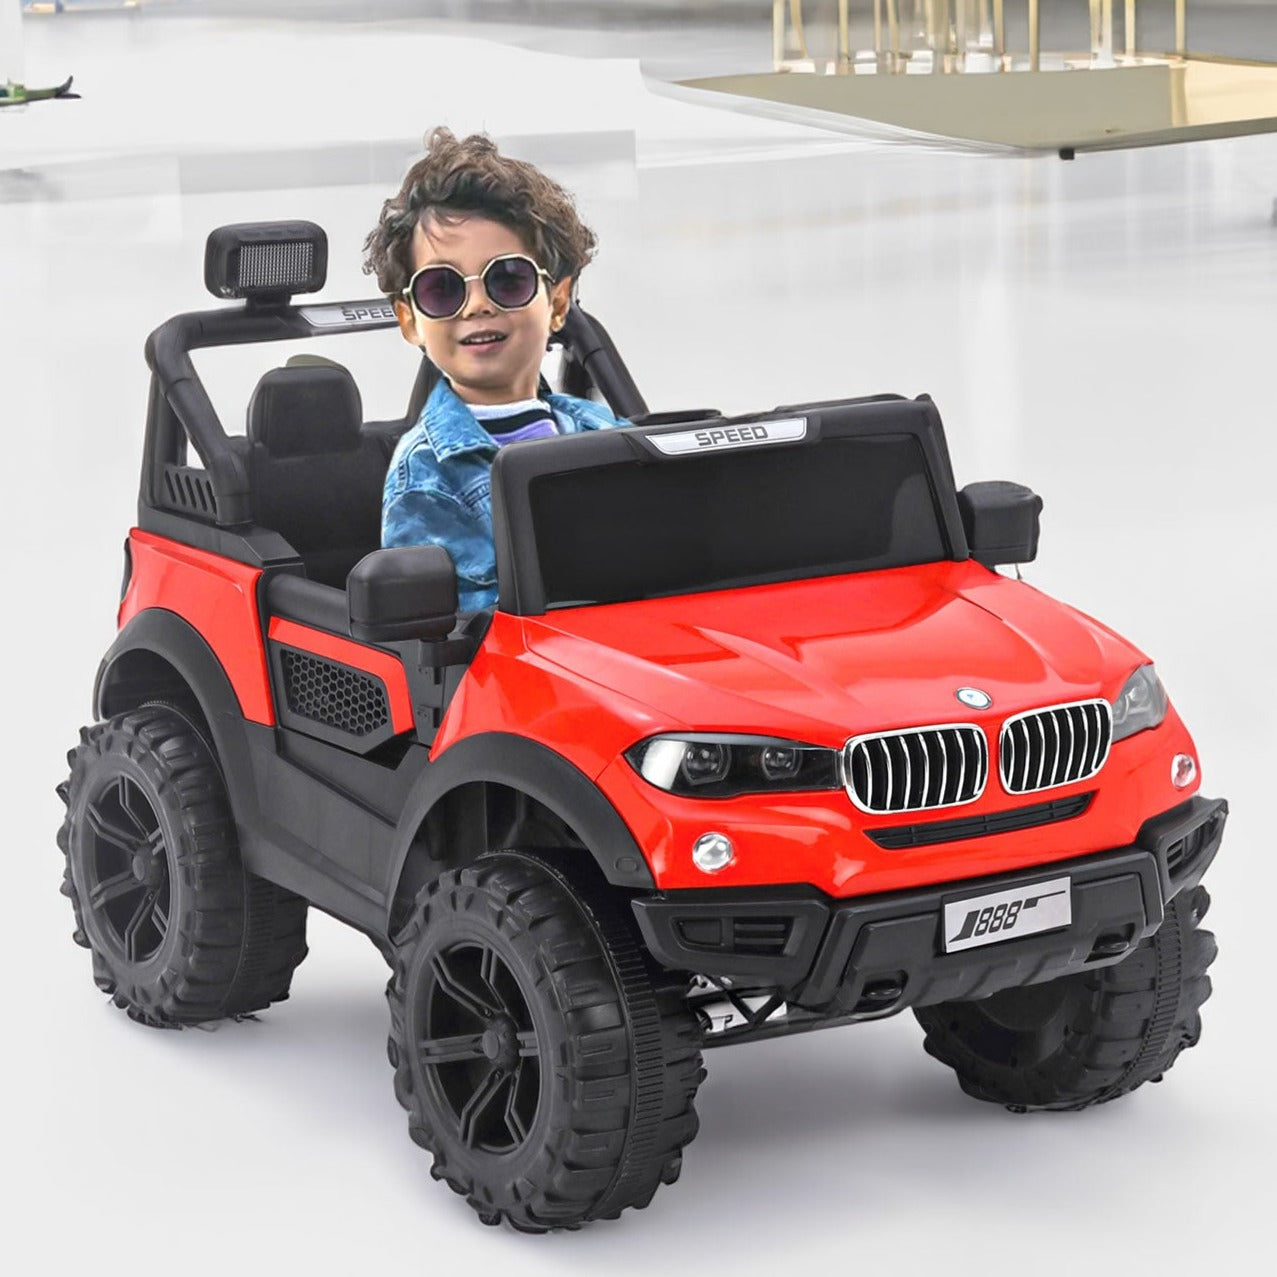 Baby Moo 4X4 Mercedes Benz Electric Ride-On Car for Kids | Rechargeable Battery | Bluetooth Remote Control | USB MP3 Player | Double Seat | Age 2-6 - Red